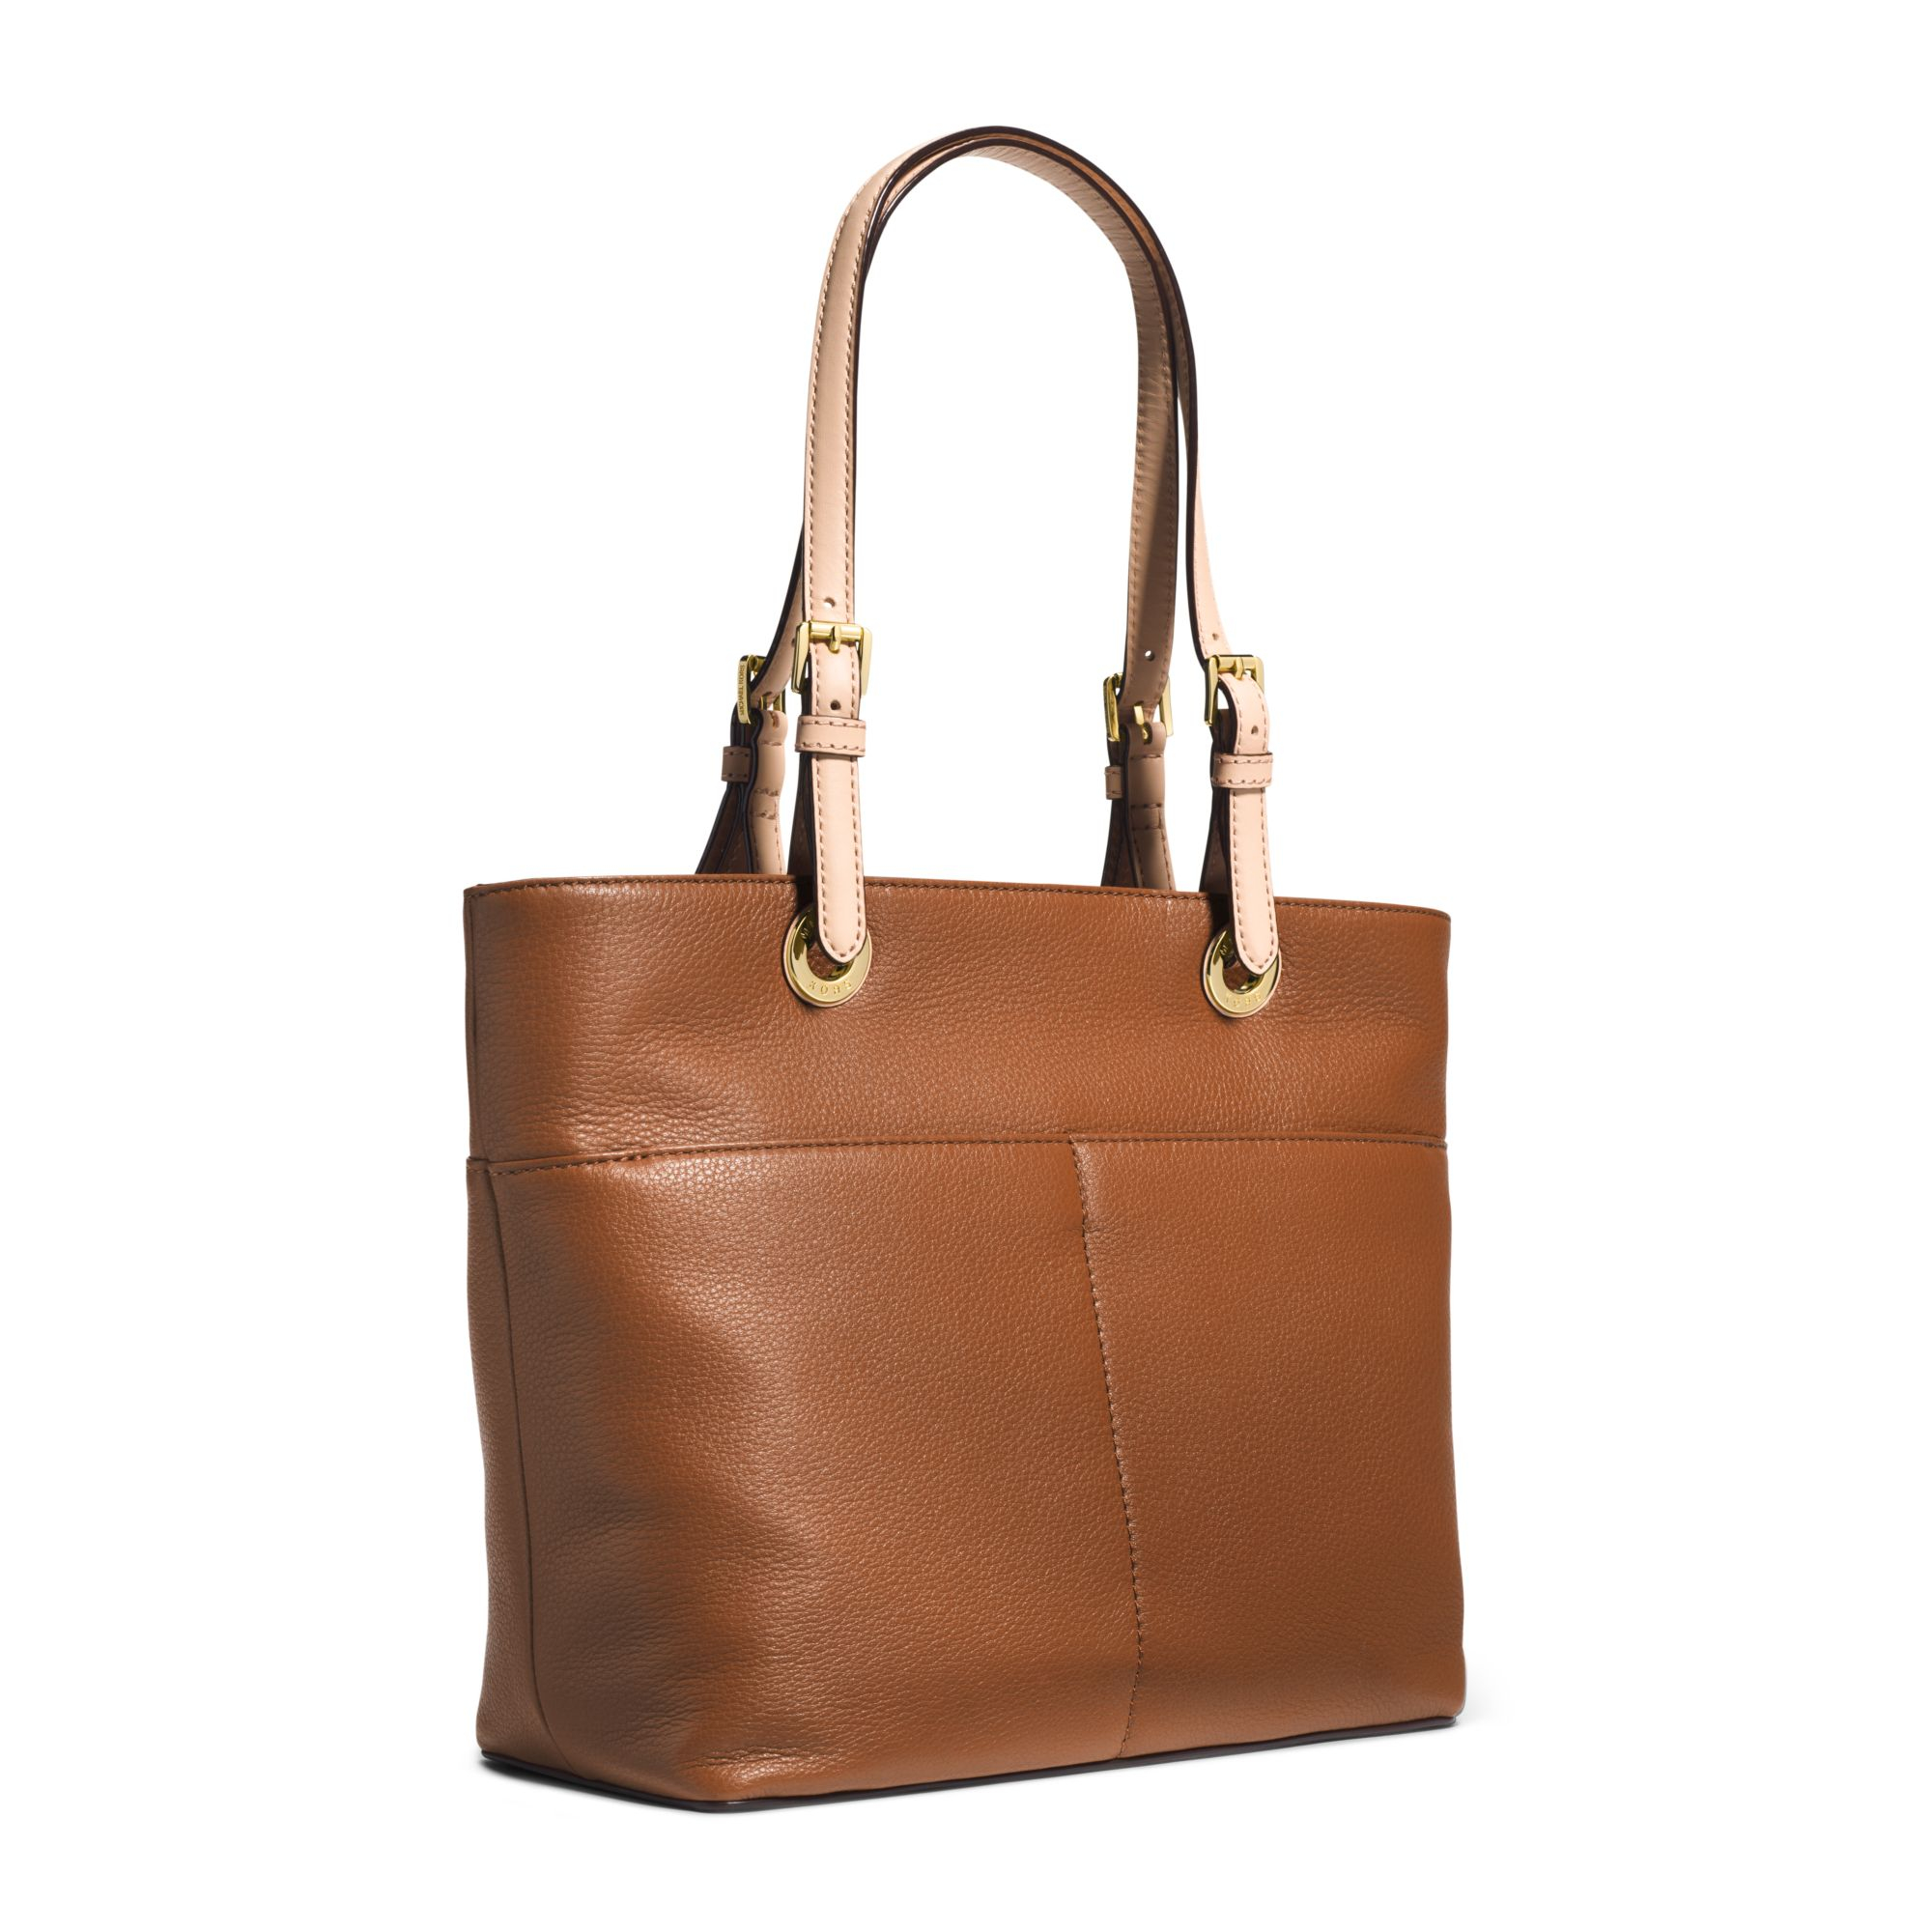 Lyst - Michael Kors Bedford Leather Tote in Brown